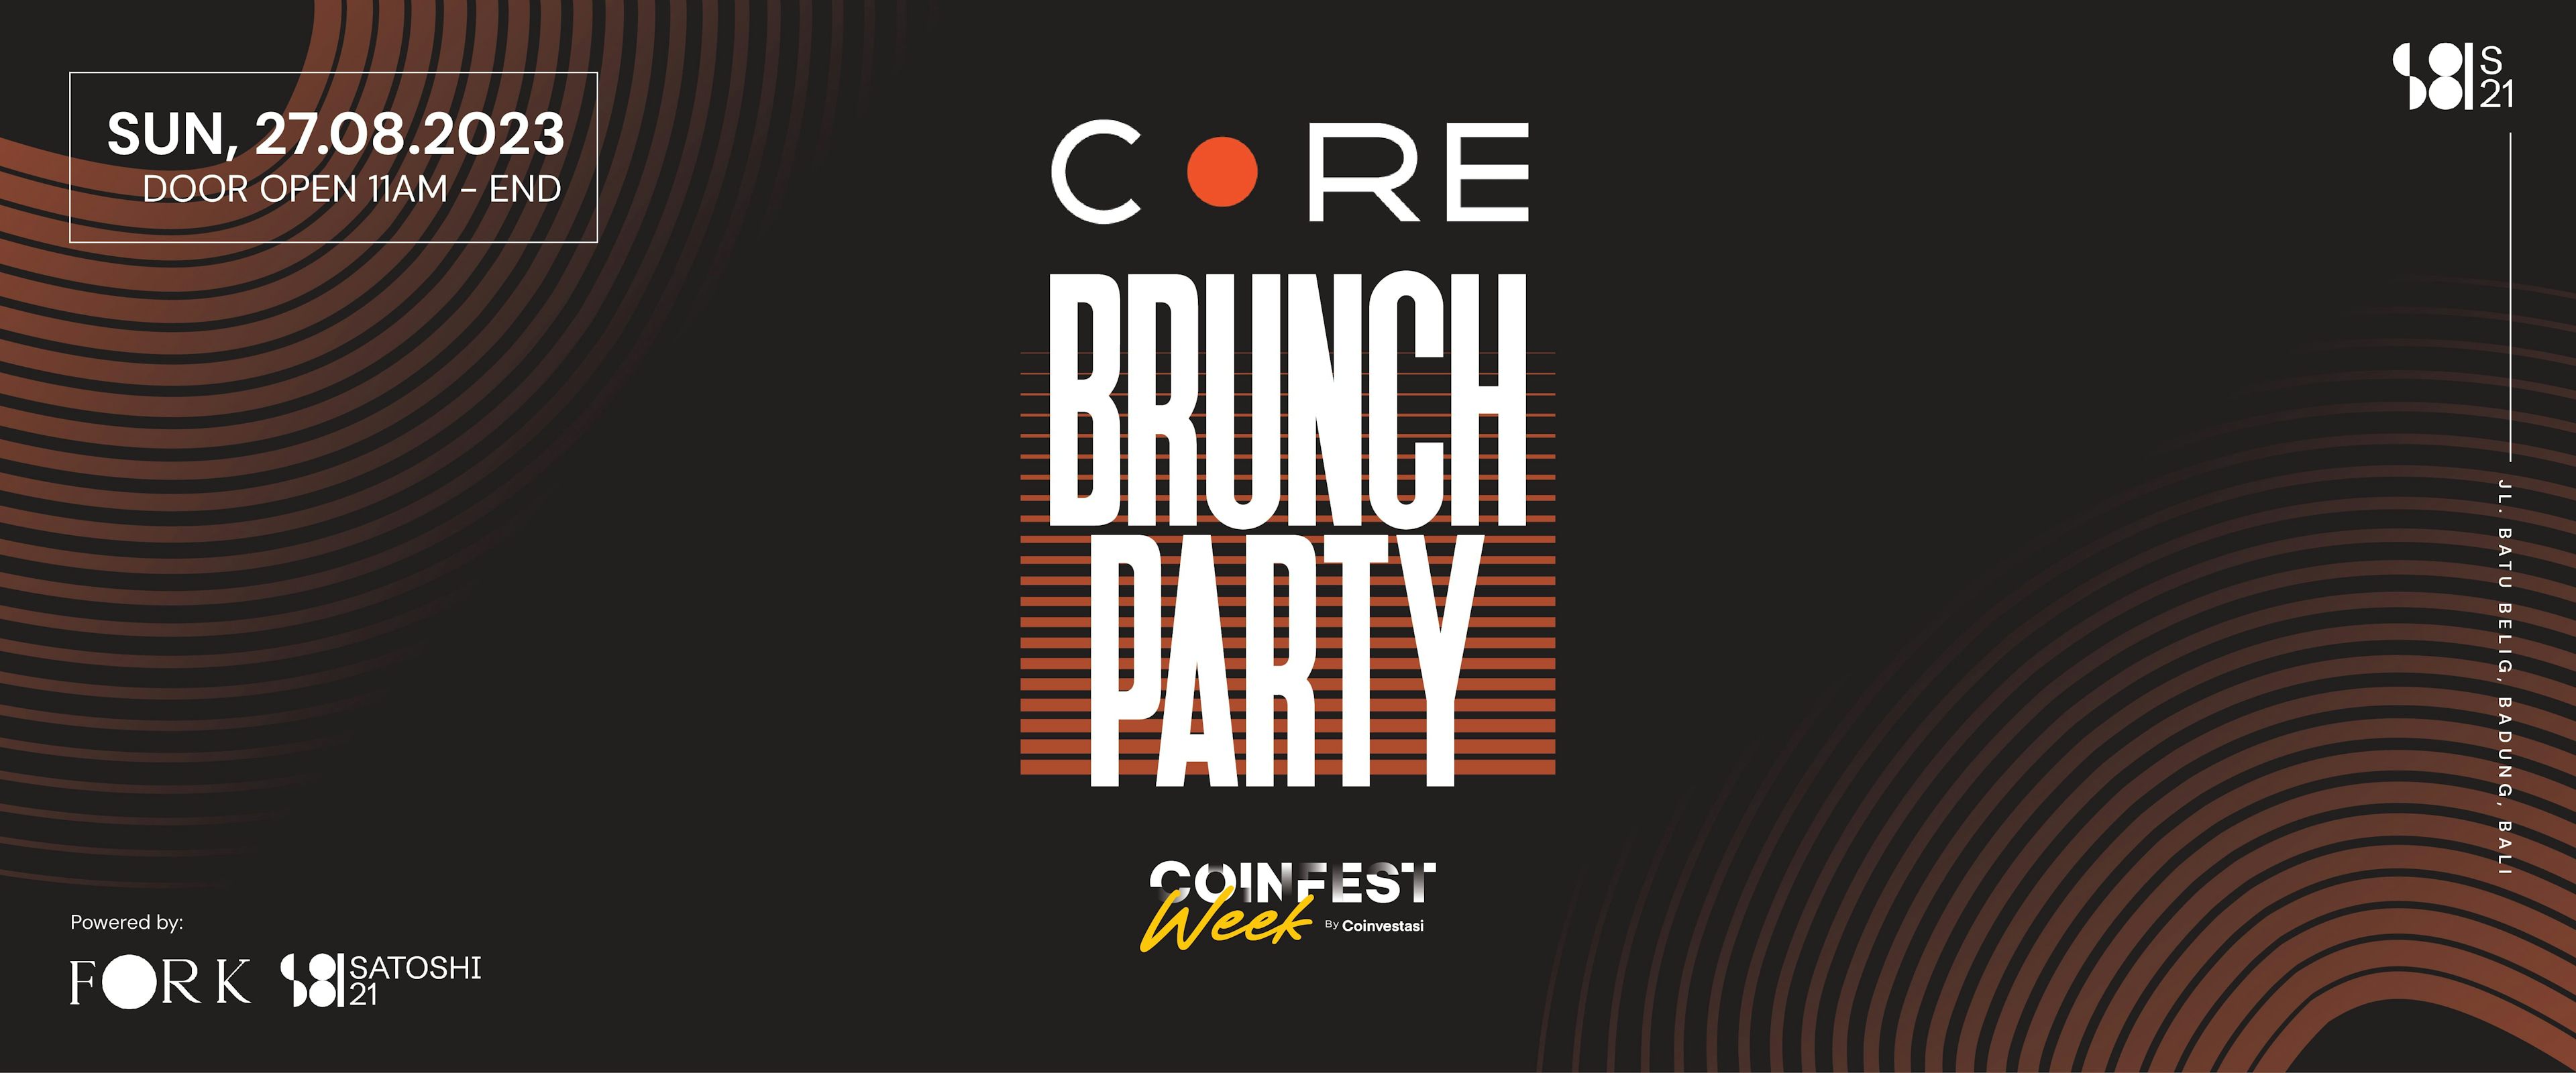 CORE Brunch Party by S21